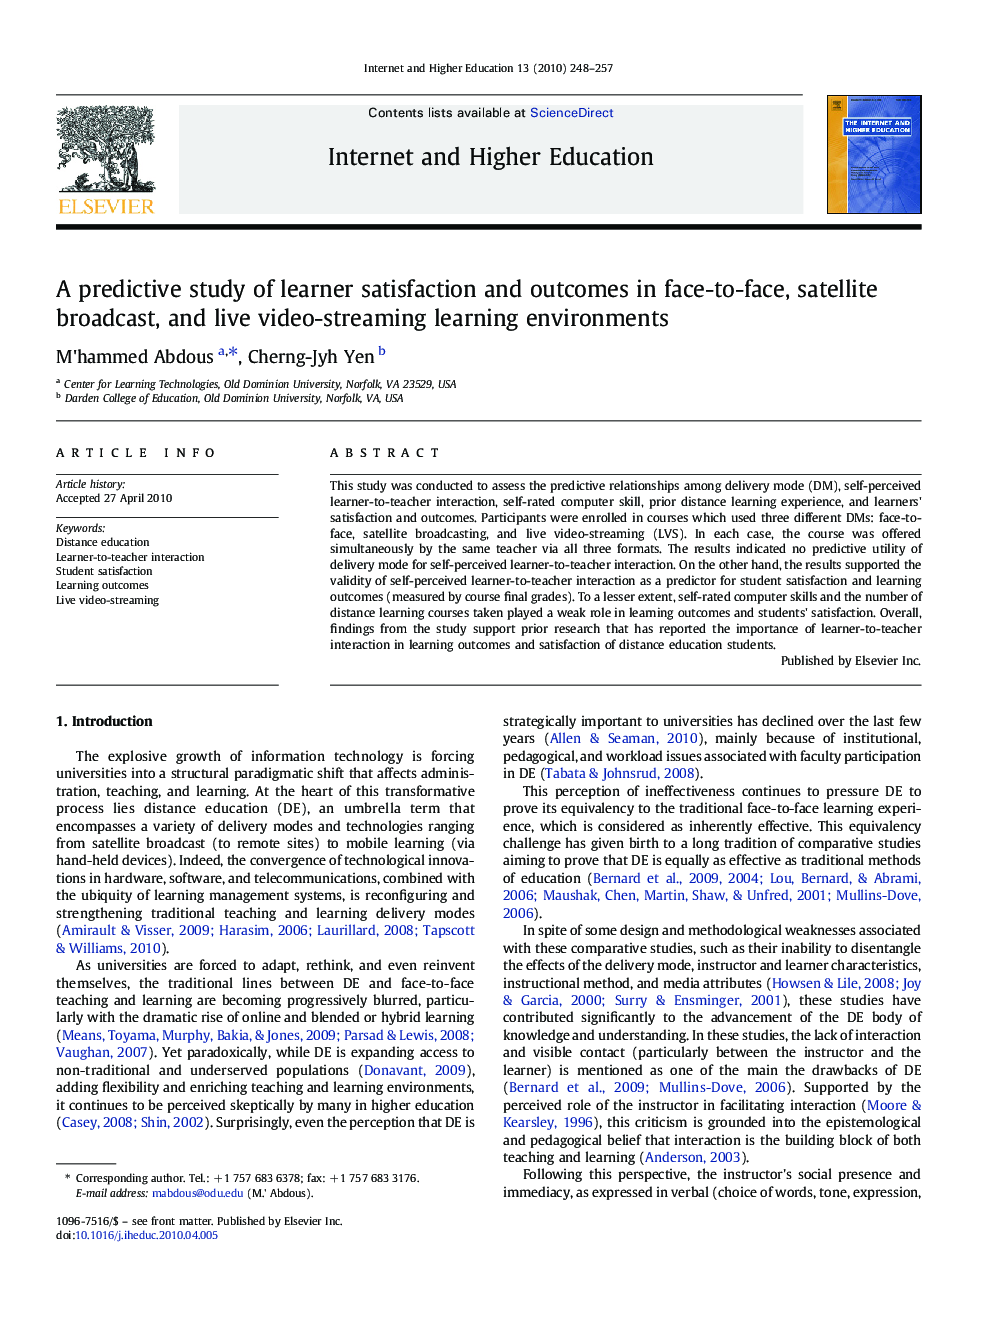 A predictive study of learner satisfaction and outcomes in face-to-face, satellite broadcast, and live video-streaming learning environments